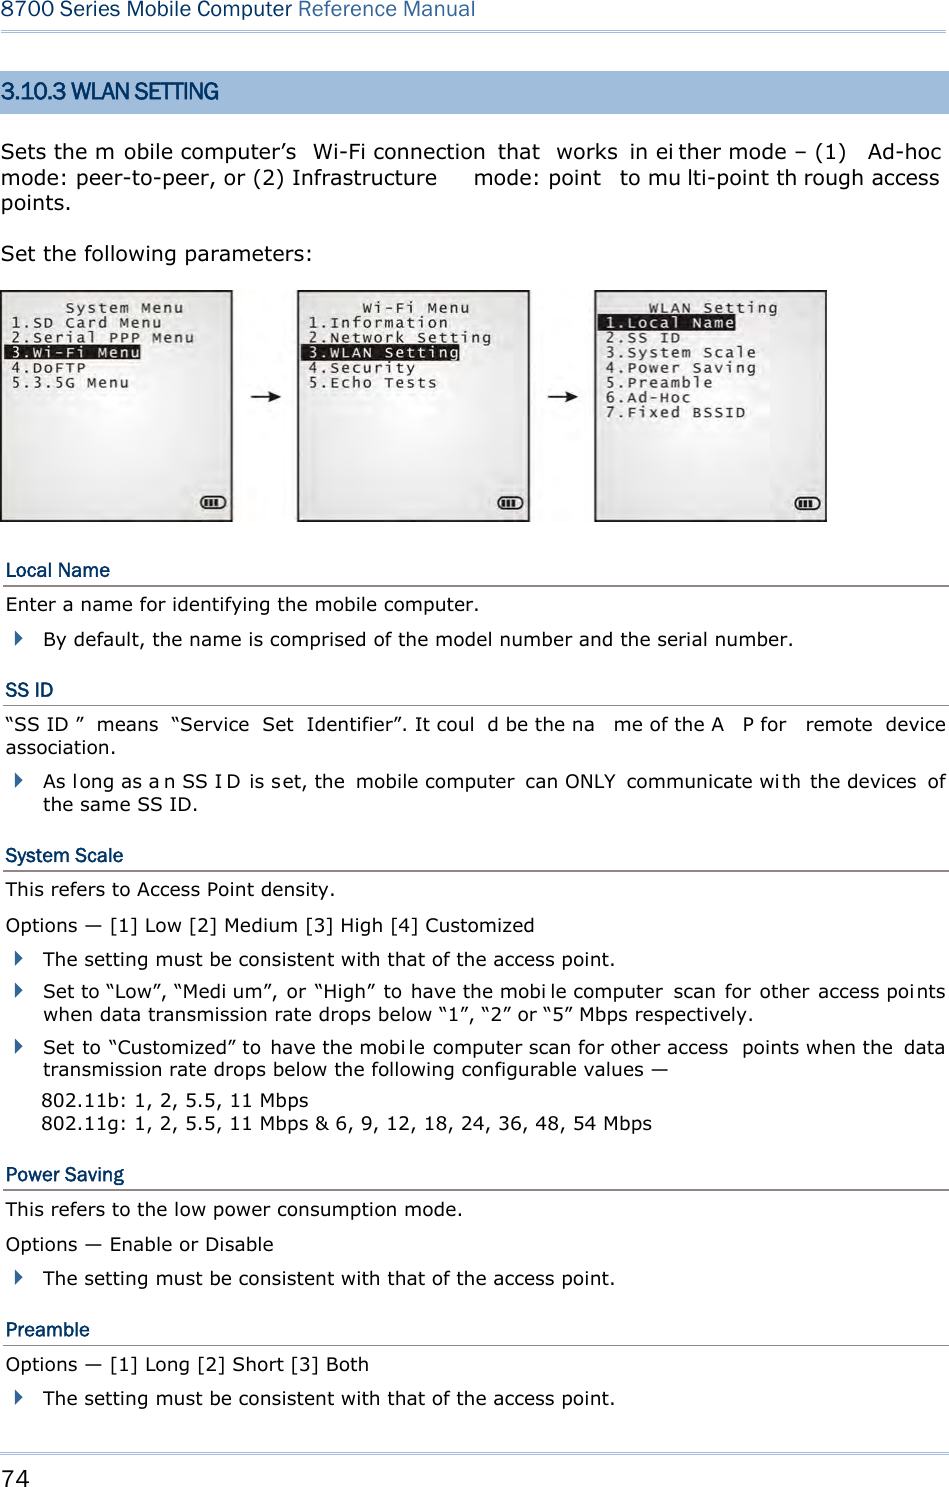 74  8700 Series Mobile Computer Reference Manual  3.10.3 WLAN SETTING Sets the m obile computer’s  Wi-Fi connection  that  works in ei ther mode – (1)  Ad-hoc mode: peer-to-peer, or (2) Infrastructure  mode: point  to mu lti-point th rough access points. Set the following parameters:  Local Name Enter a name for identifying the mobile computer.  By default, the name is comprised of the model number and the serial number. SS ID “SS ID ” means “Service Set Identifier”. It coul d be the na me of the A P for  remote device association.  As l ong as a n SS I D is set, the mobile computer  can ONLY  communicate with the devices  of the same SS ID. System Scale This refers to Access Point density. Options — [1] Low [2] Medium [3] High [4] Customized  The setting must be consistent with that of the access point.  Set to “Low”, “Medi um”, or “High” to have the mobi le computer scan for other access points when data transmission rate drops below “1”, “2” or “5” Mbps respectively.  Set to “Customized” to have the mobi le computer scan for other access  points when the  data transmission rate drops below the following configurable values — 802.11b: 1, 2, 5.5, 11 Mbps 802.11g: 1, 2, 5.5, 11 Mbps &amp; 6, 9, 12, 18, 24, 36, 48, 54 Mbps Power Saving This refers to the low power consumption mode. Options — Enable or Disable  The setting must be consistent with that of the access point. Preamble Options — [1] Long [2] Short [3] Both  The setting must be consistent with that of the access point. 